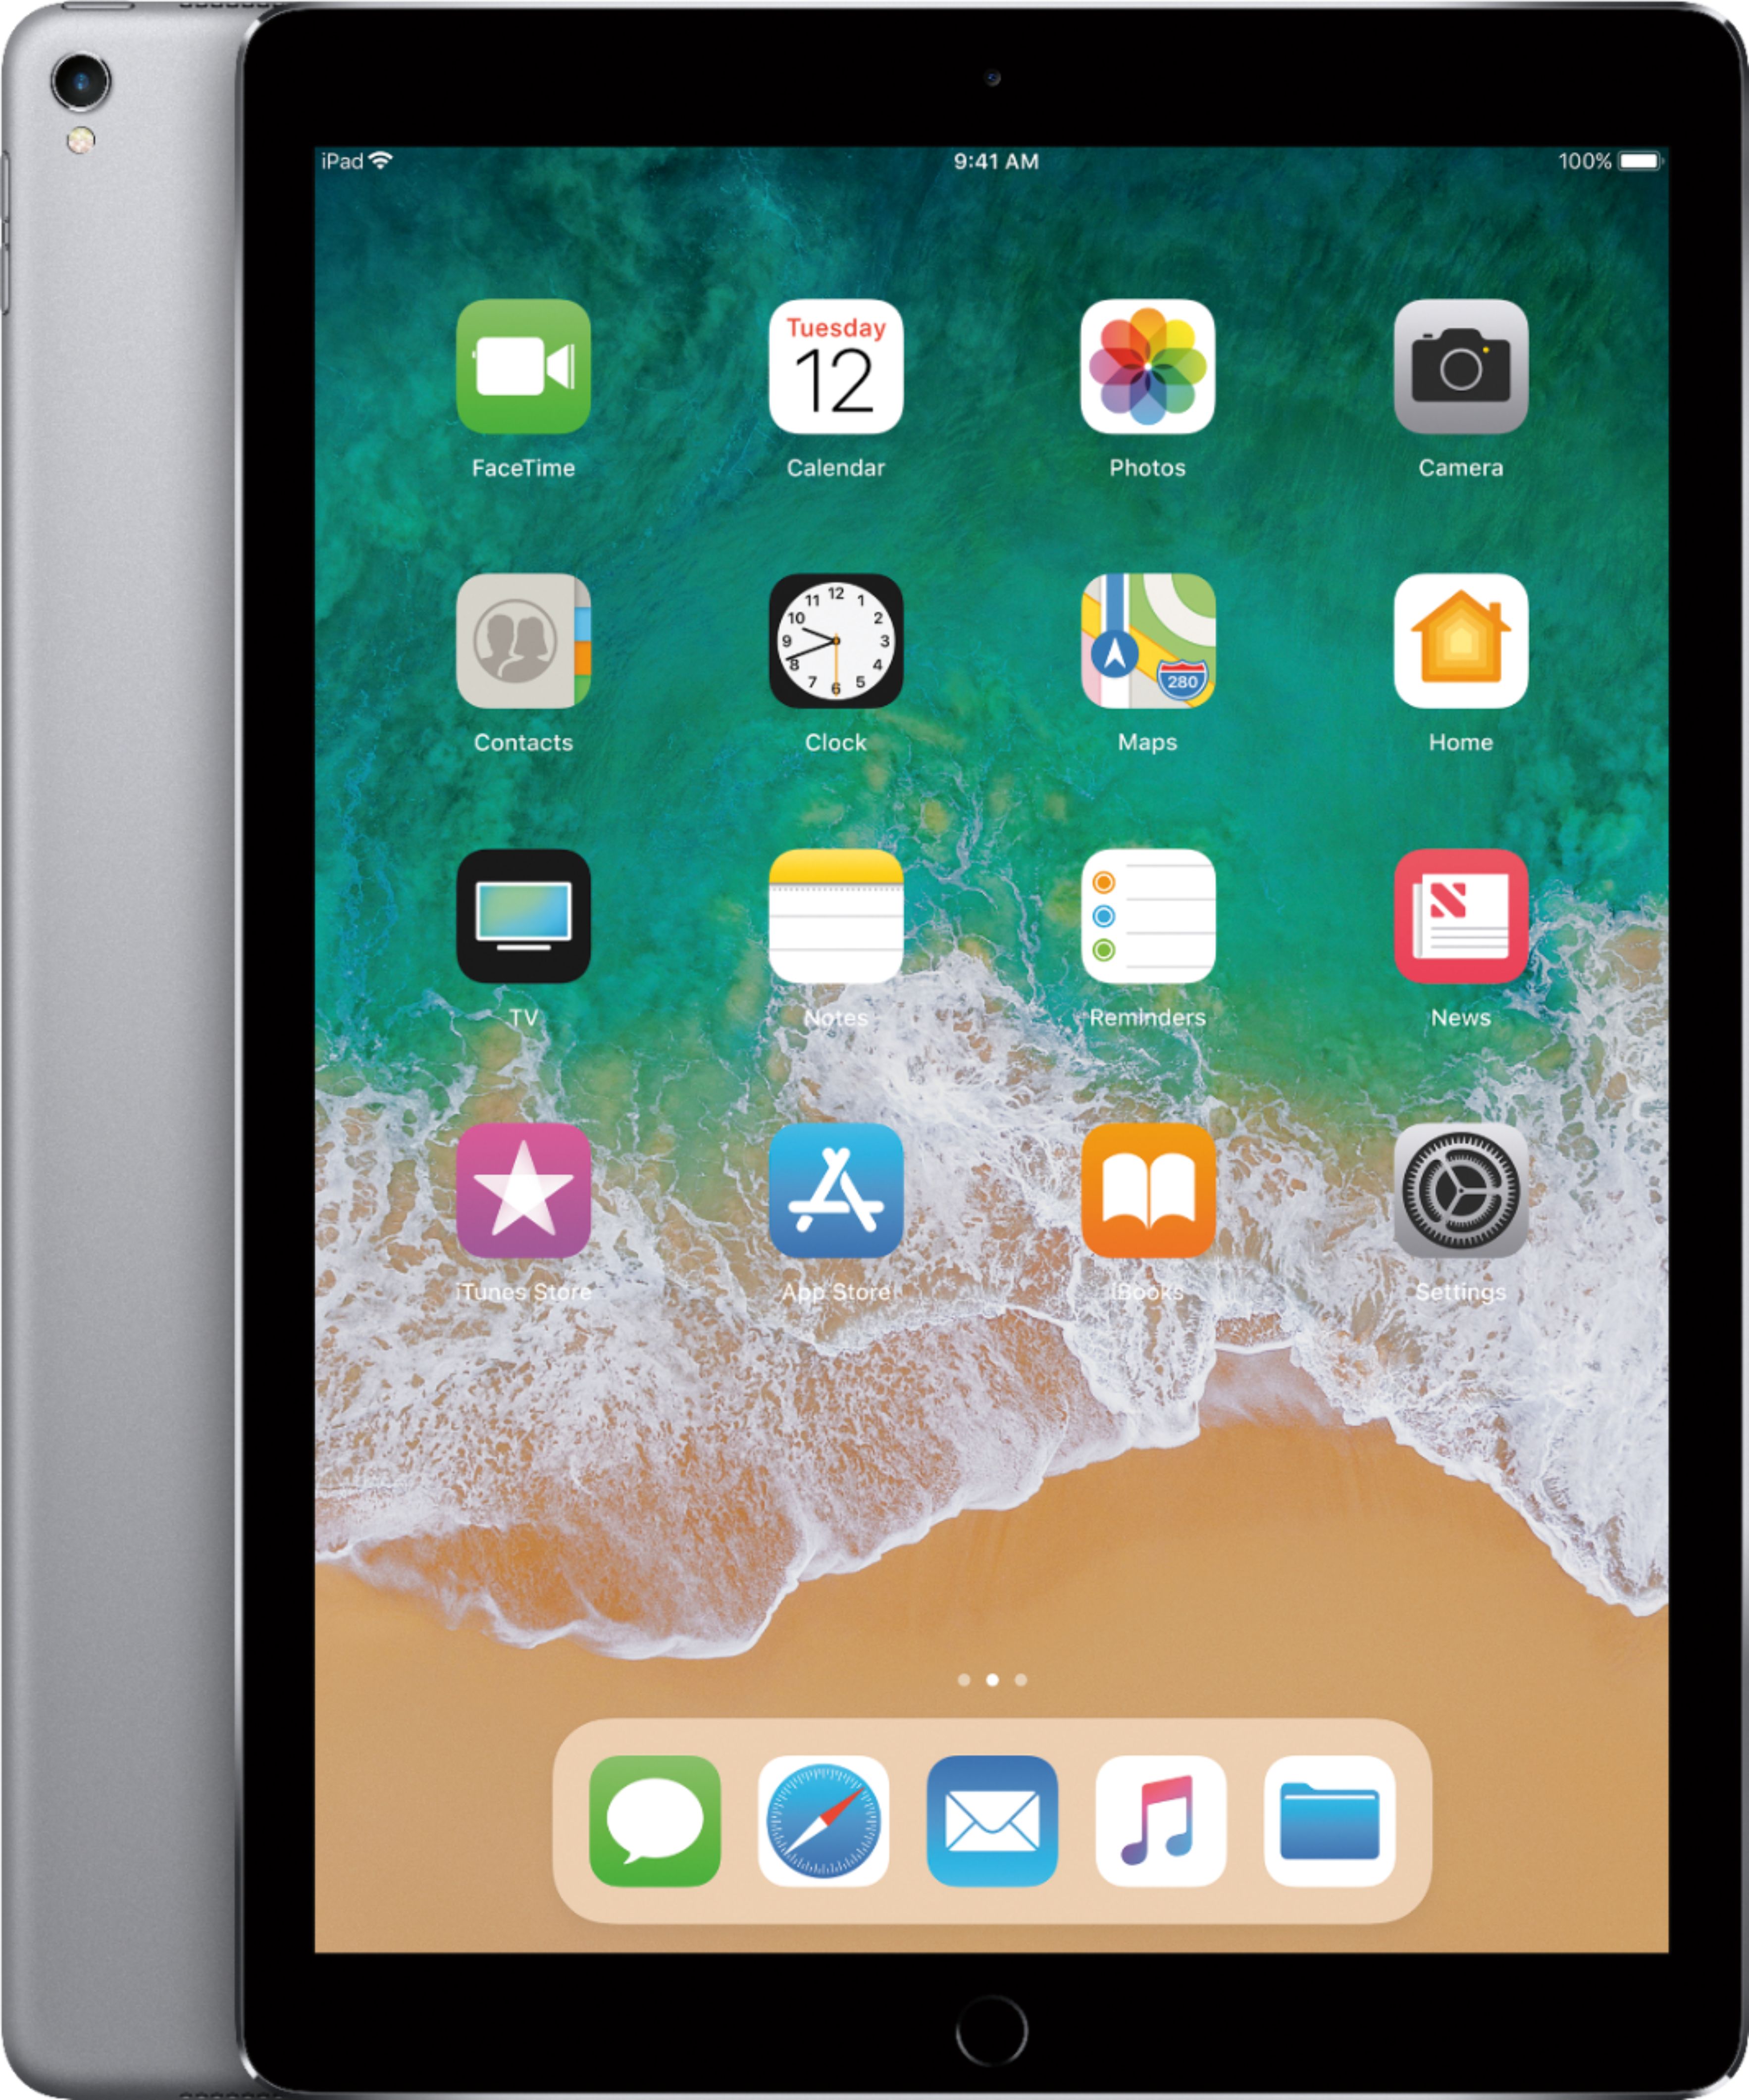 Apple iPad Pro 12.9-inch (2nd generation) with Wi-Fi Cellular 256 GB  (ATT) Space Gray MPA42LL/A Best Buy